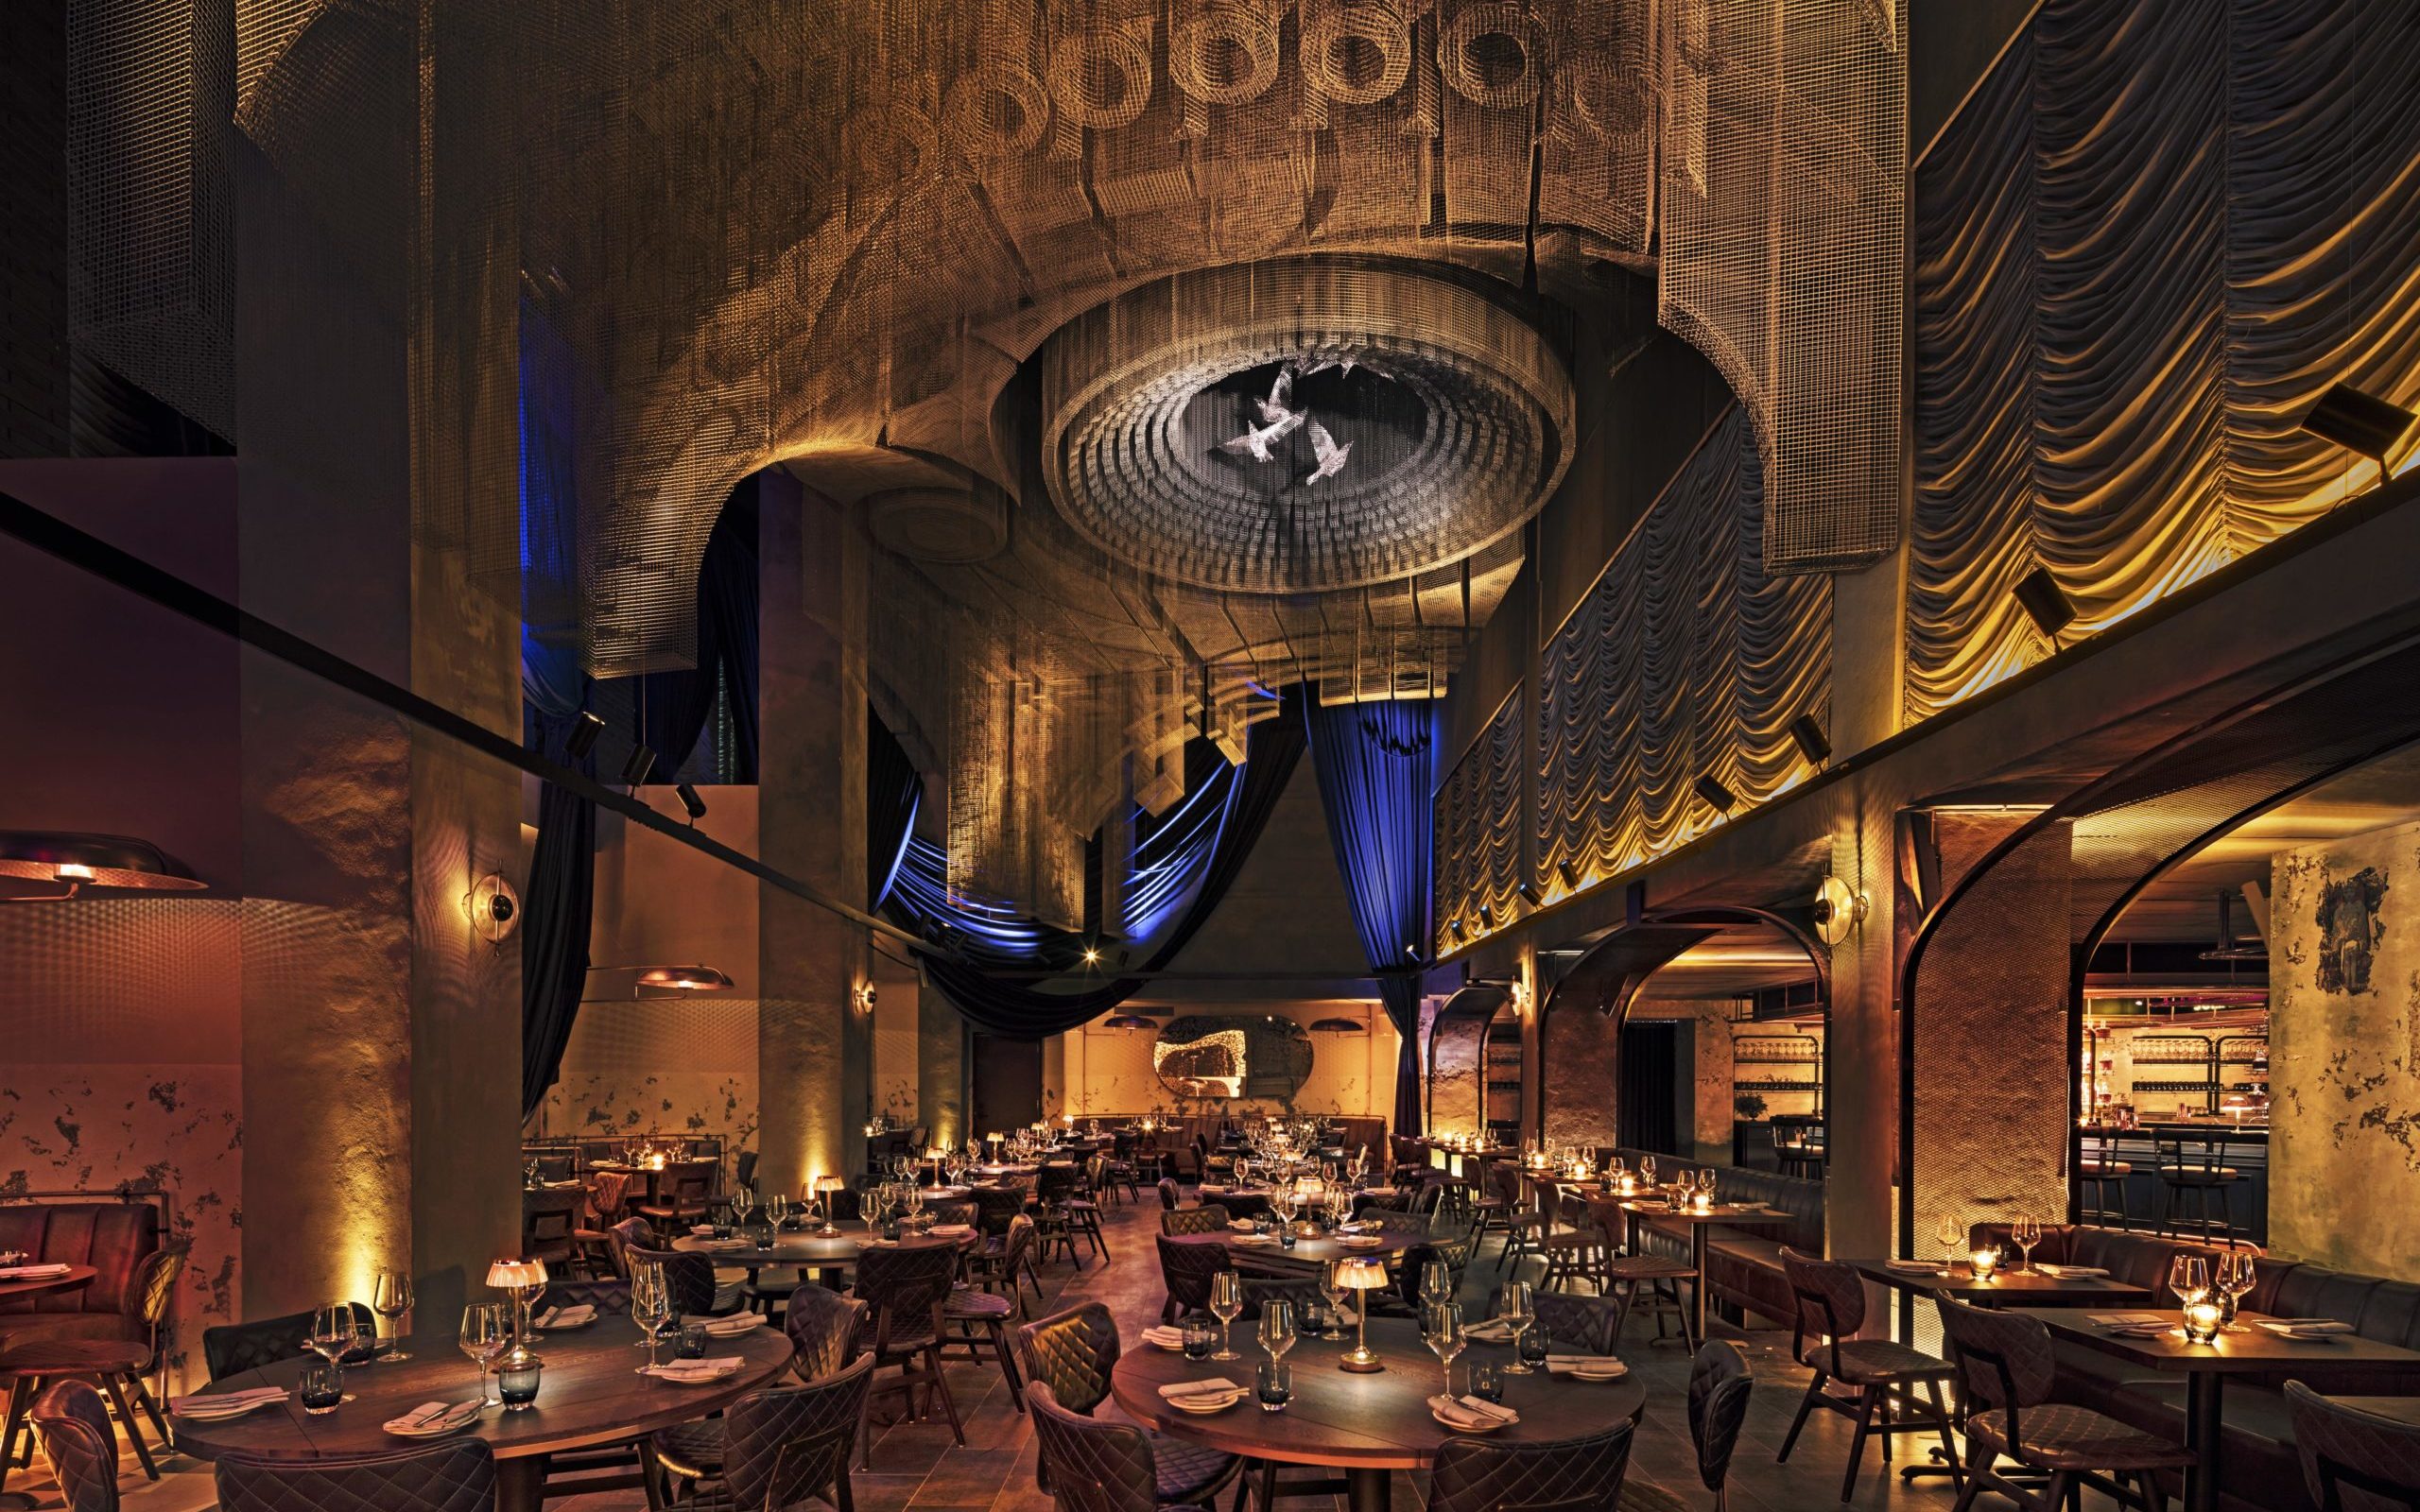 Cathédrale Restaurant at Moxy East Village in New York City Is Where You Need to Make Your Next Dinner Reservation